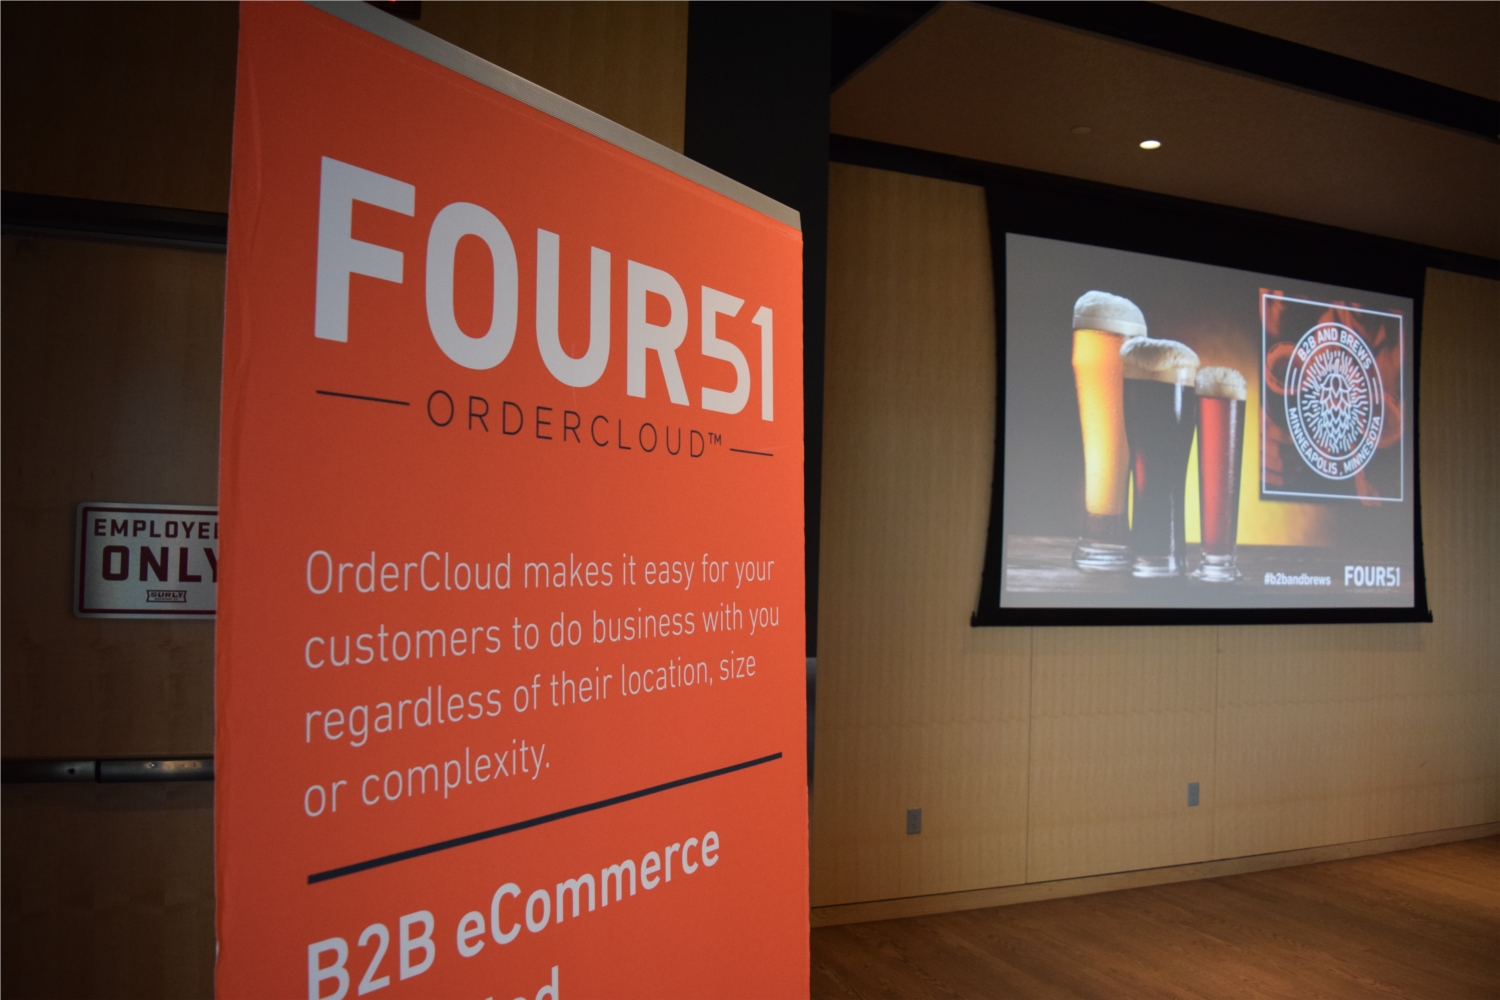 In early April 2016, we hosted our first B2B and Brews event at Surly Brewing. Close to 200 people came together to hear from B2B experts on the topic of modernizing the B2B experience. 